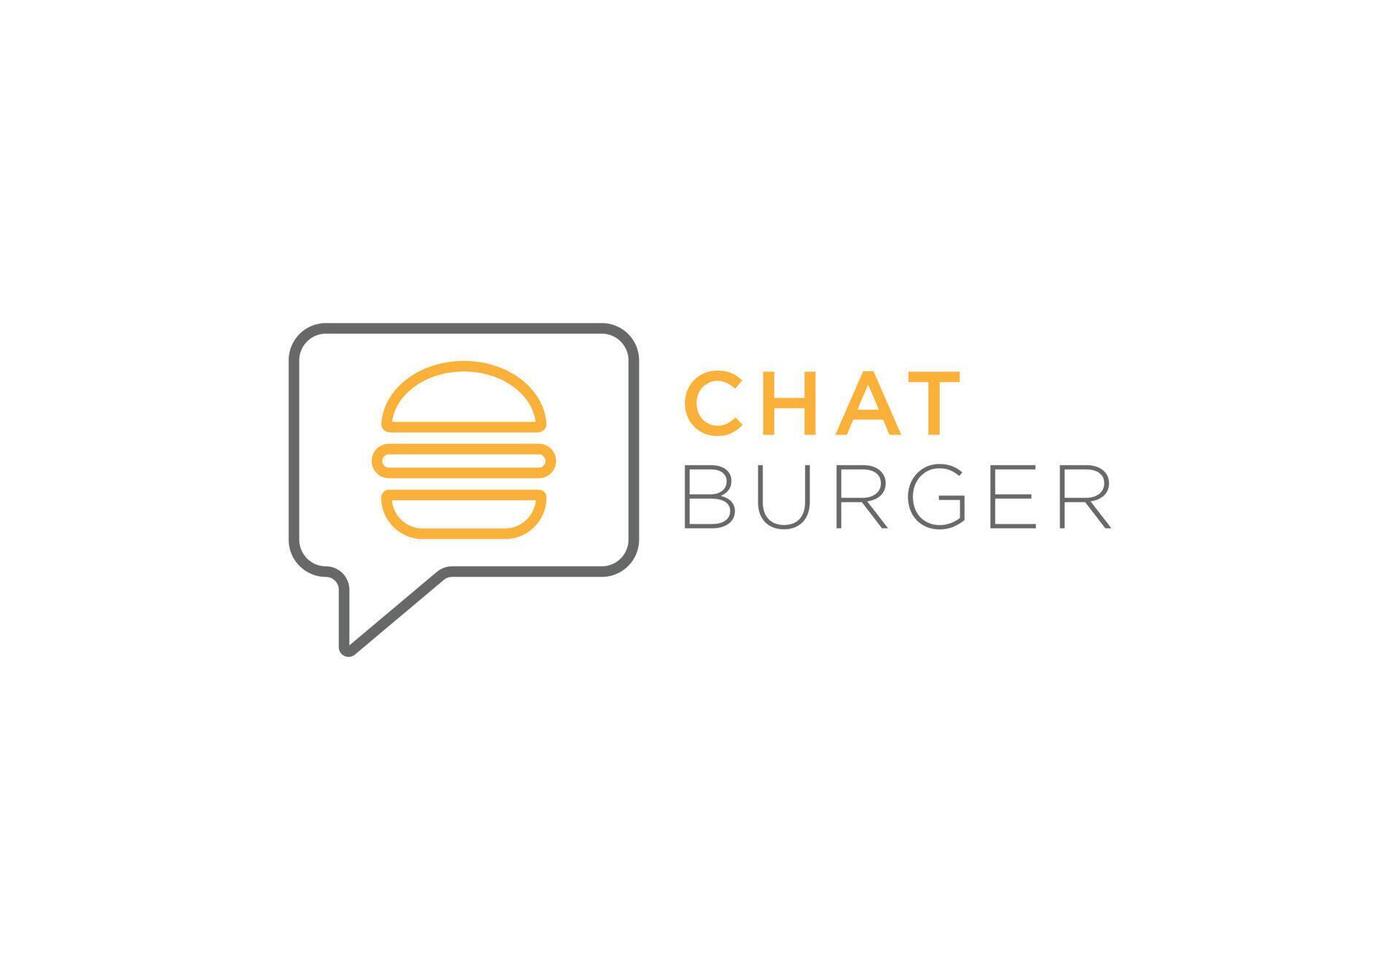 eps10 vector chat burger logo design template with speech bubble isolated on white background